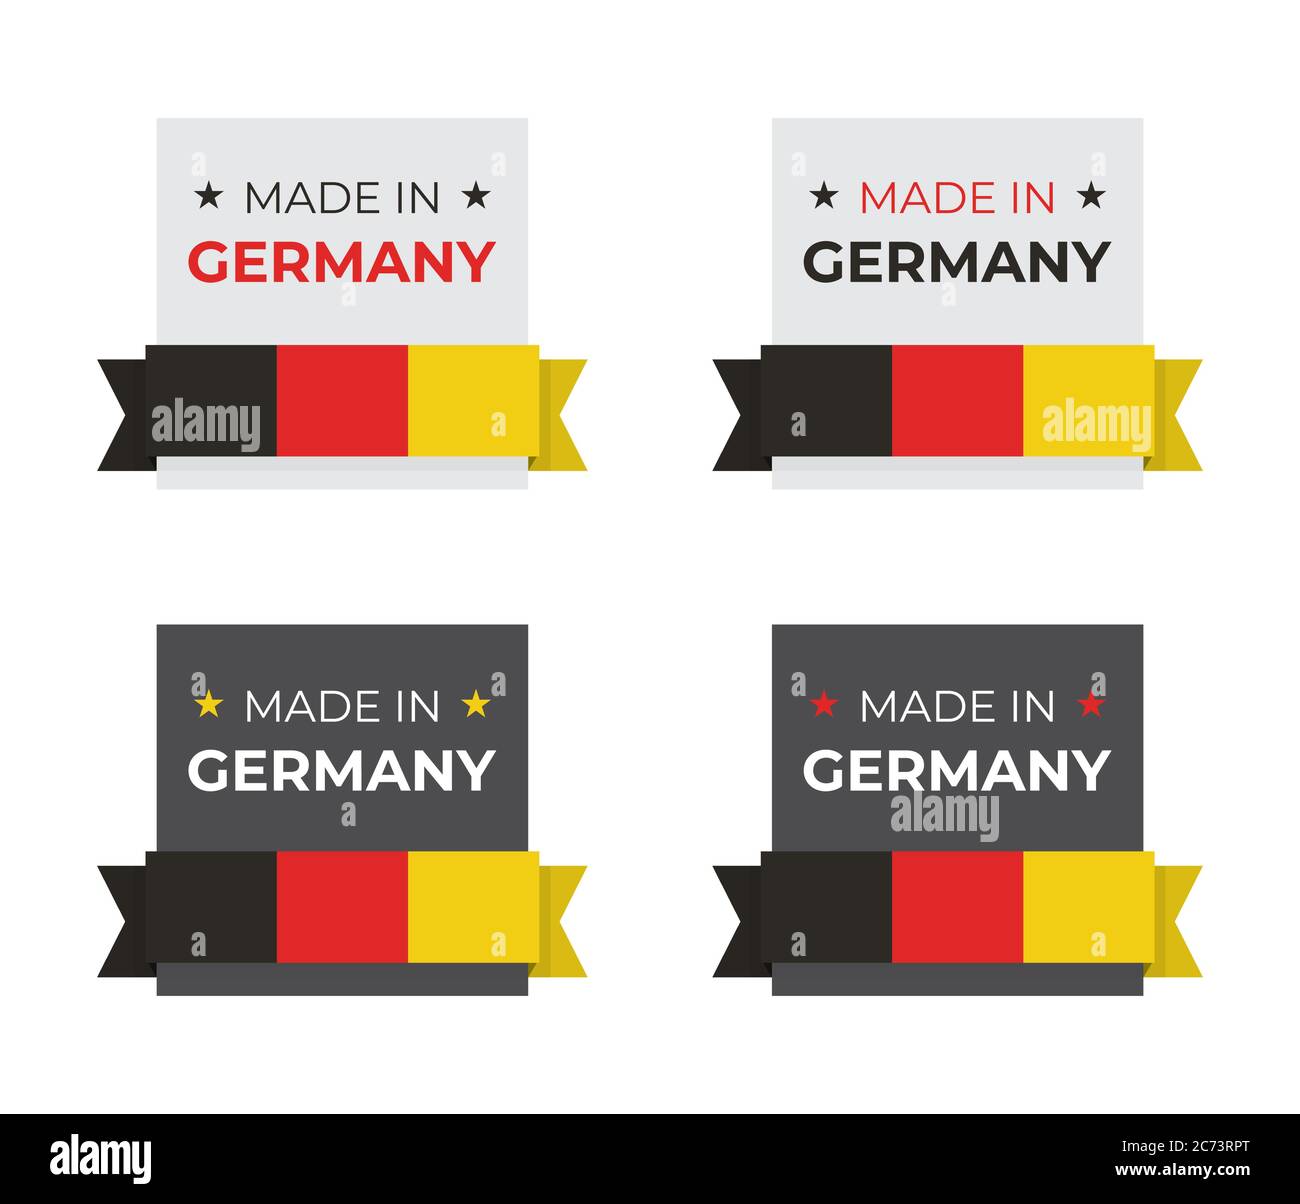 Made in Germany German flag vector illustration design for business and product badge and emblem concept with red yellow black colors Stock Vector